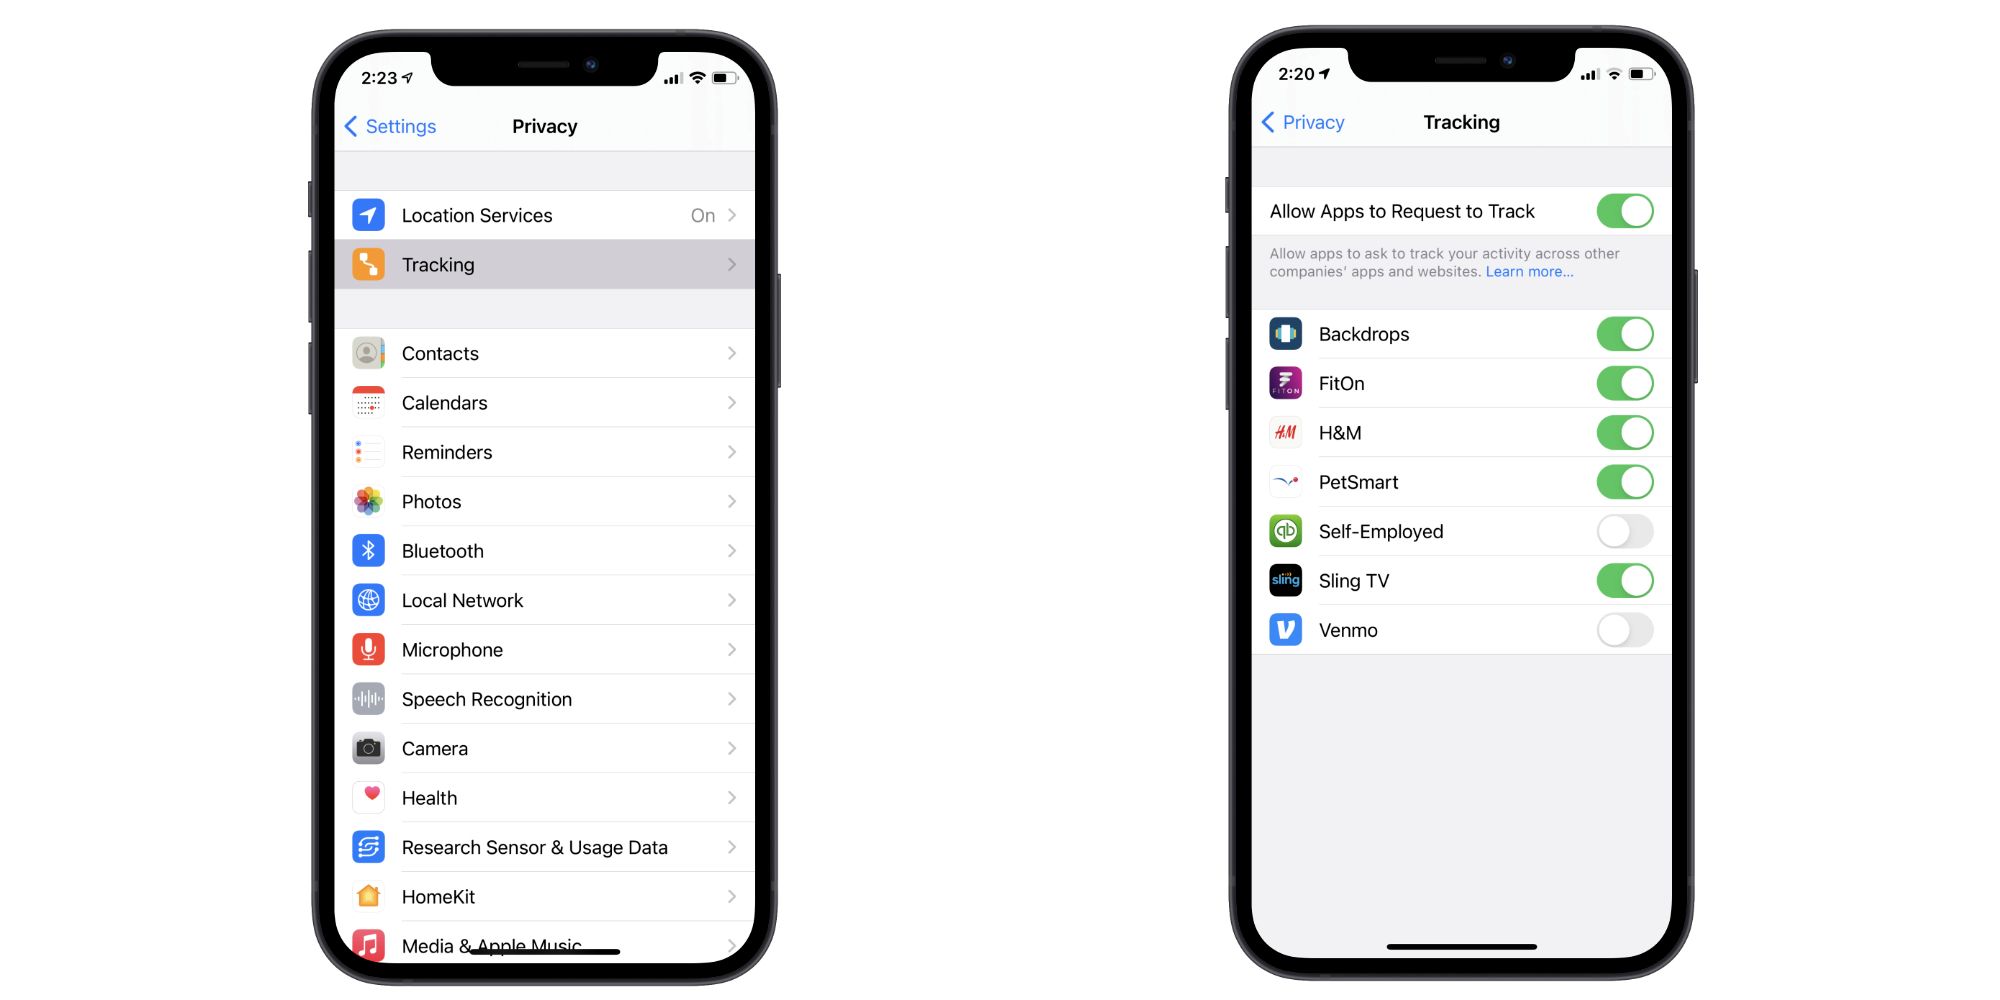 App tracking settings page in iOS 14.5